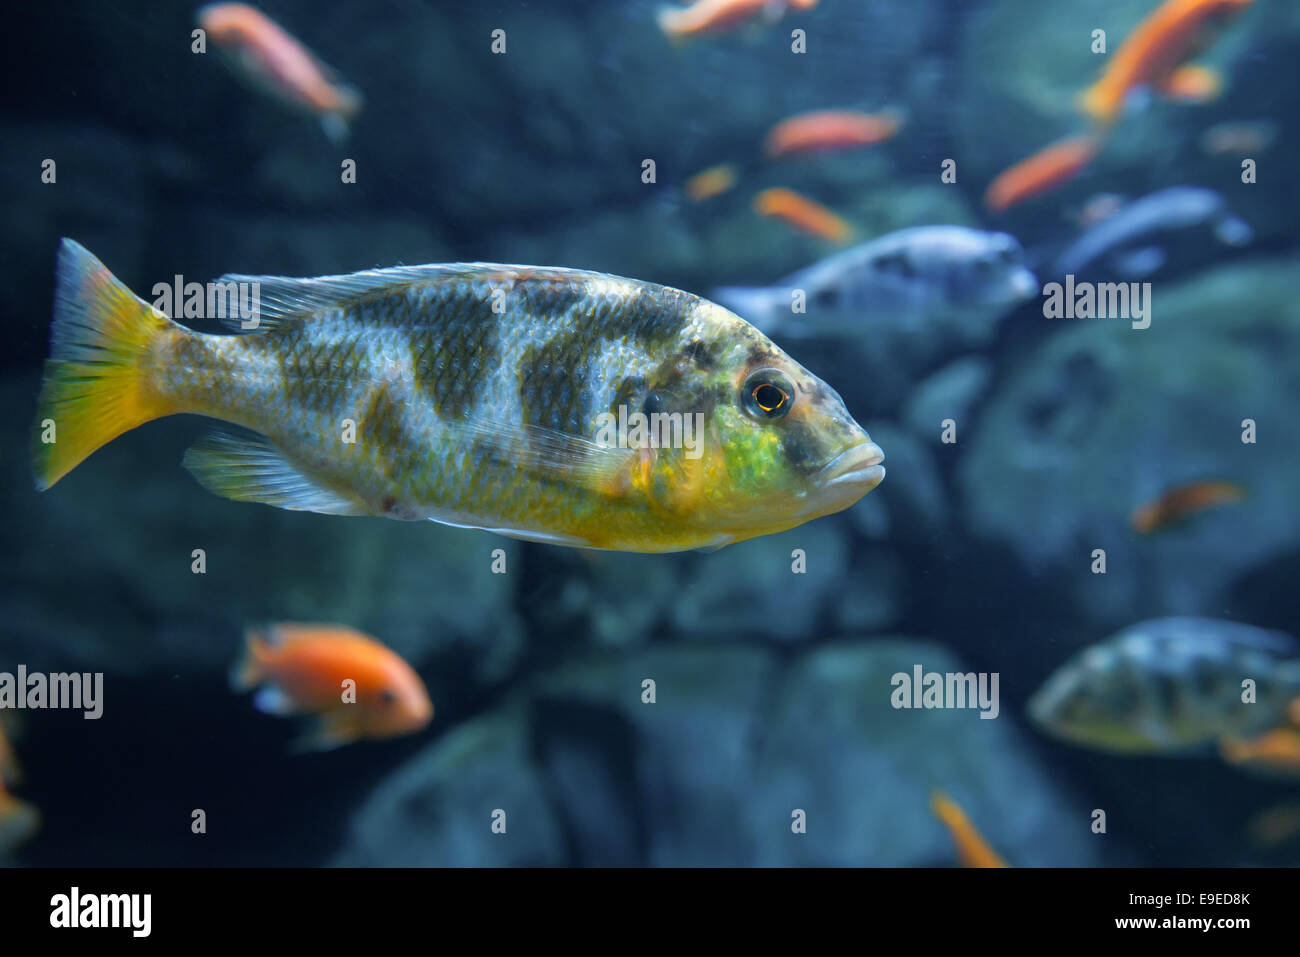 Aquarium fish with yellow fins and tail, on the background of their cousins Stock Photo